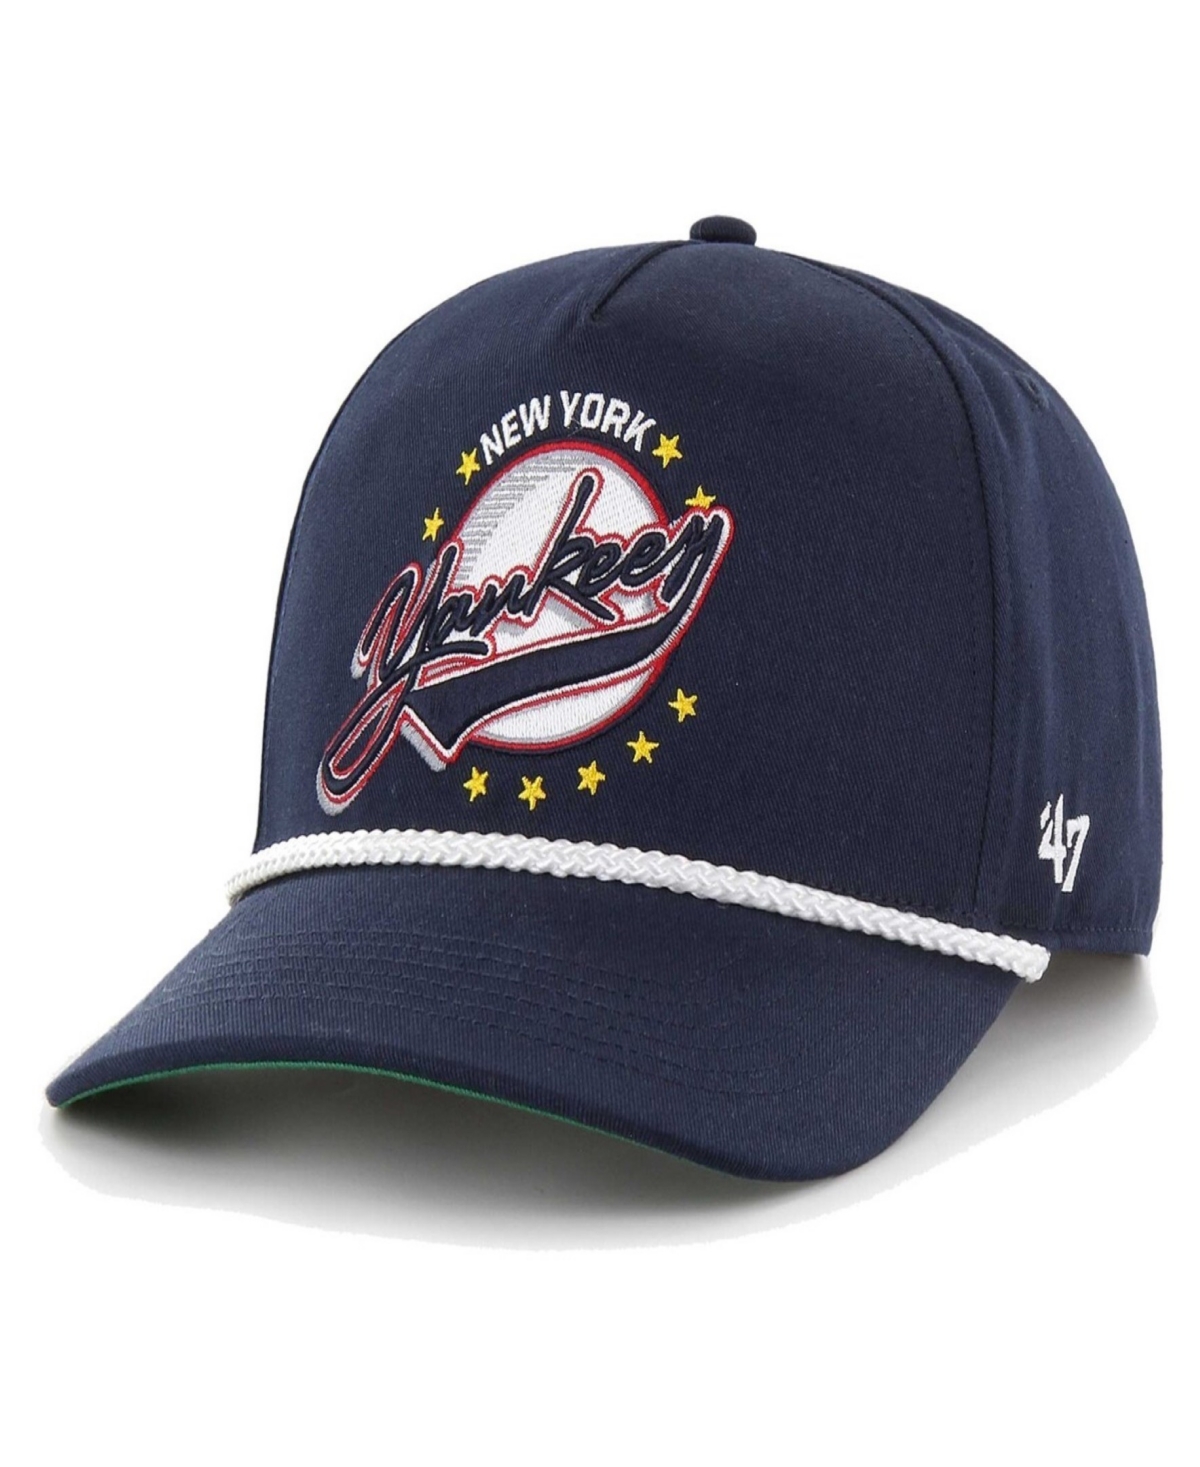 Shop 47 Brand Men's Navy New York Yankees Wax Pack Collection Premier Hitch Adjustable Hat